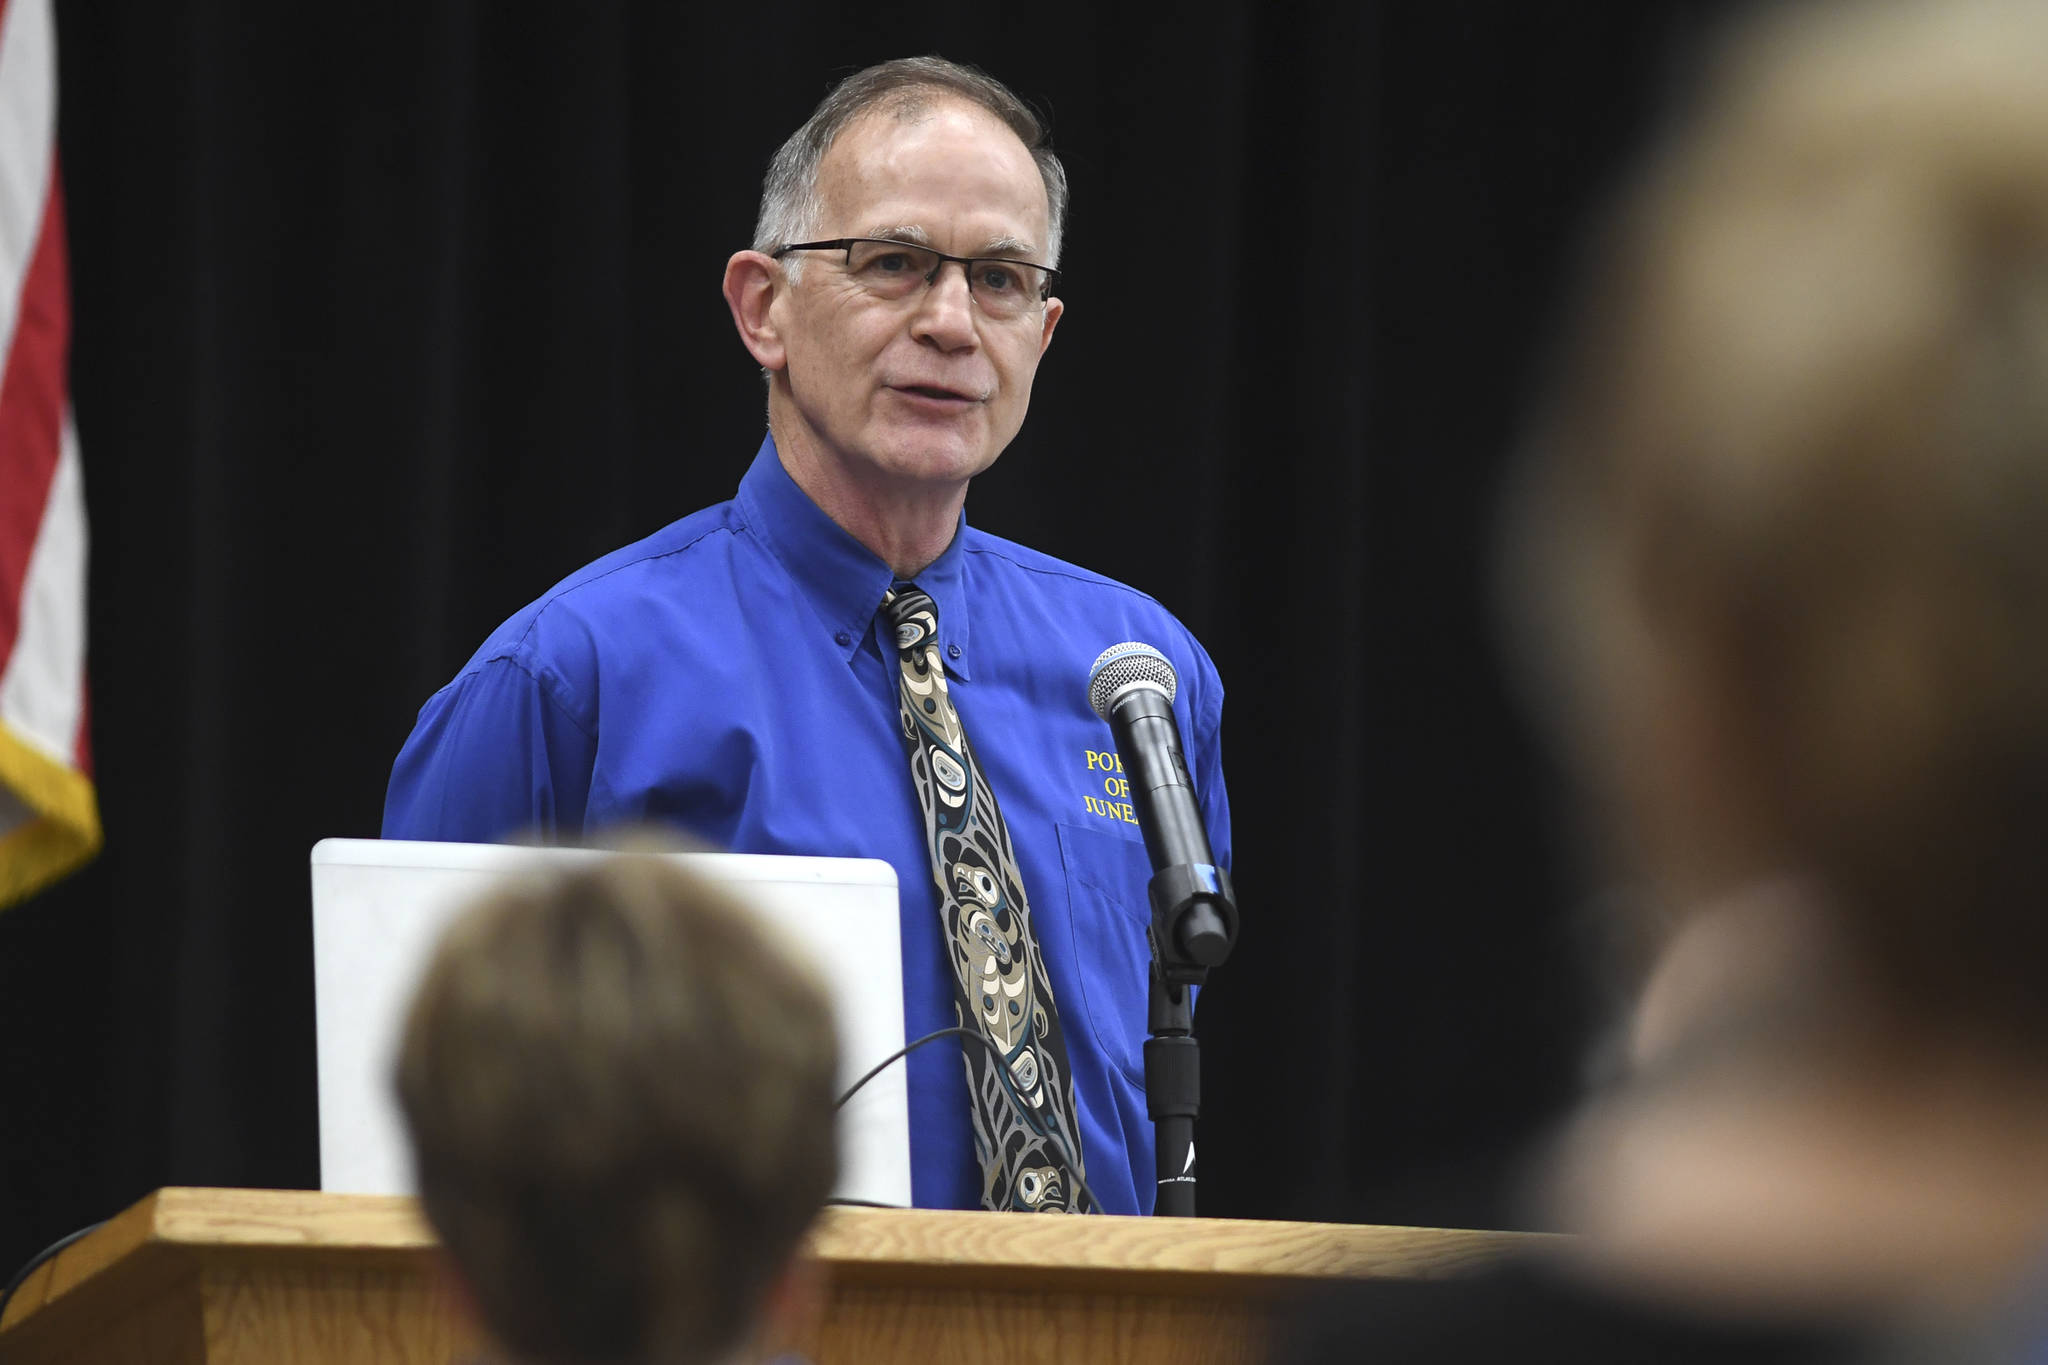 Juneau Port Director Carl Uchytil speaks to the Juneau Chamber of Commerce at its weekly luncheon at the Elizabeth Peratrovich Hall on Thursday, June 20, 2019. (Michael Penn | Juneau Empire)